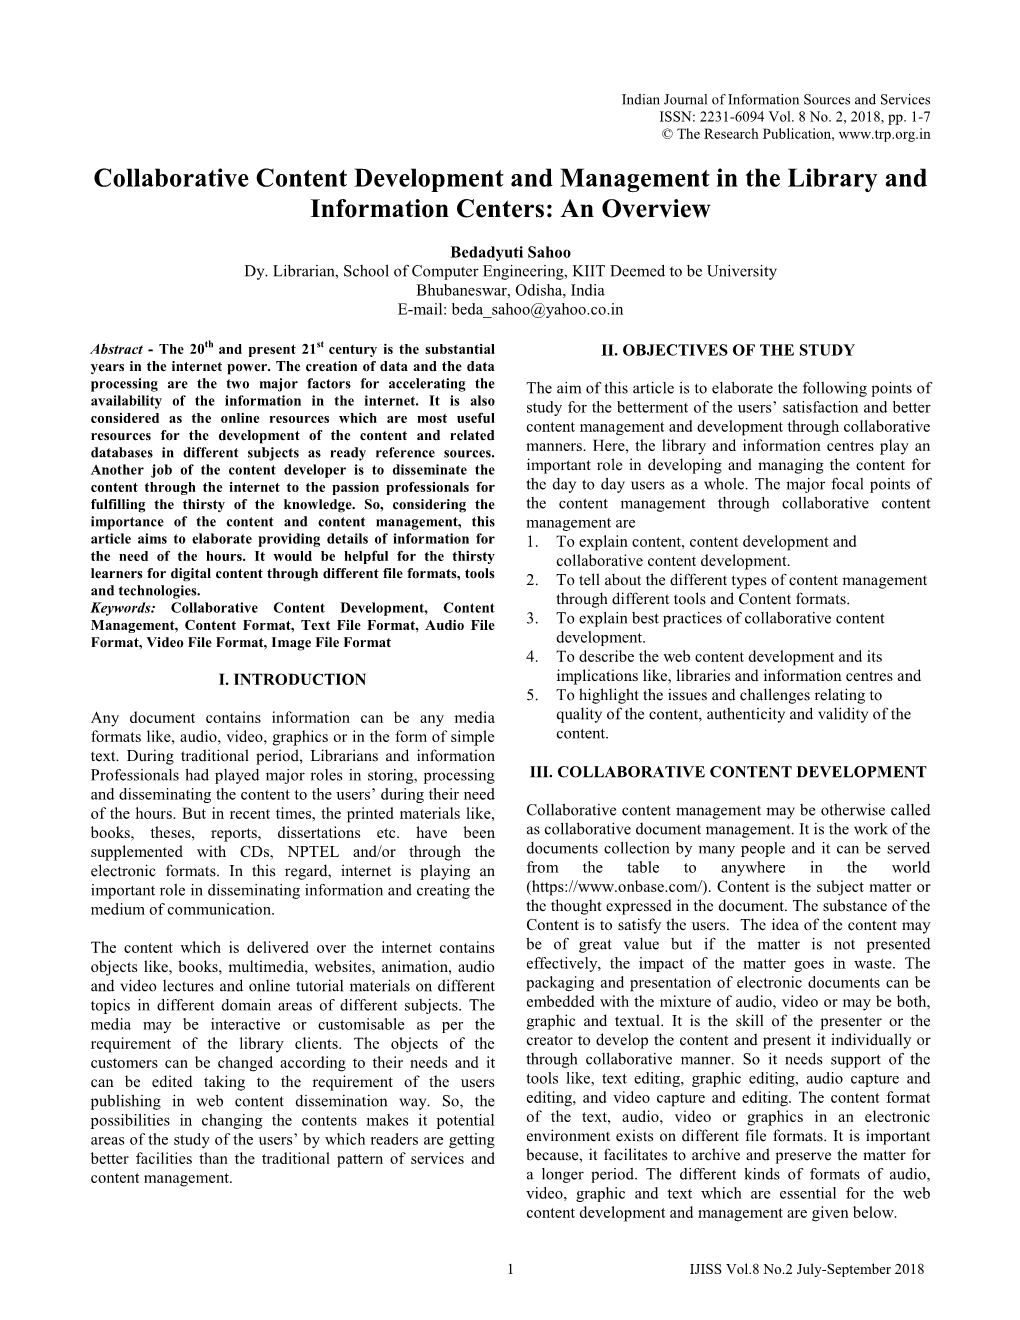 Collaborative Content Development and Management in the Library and Information Centers: an Overview